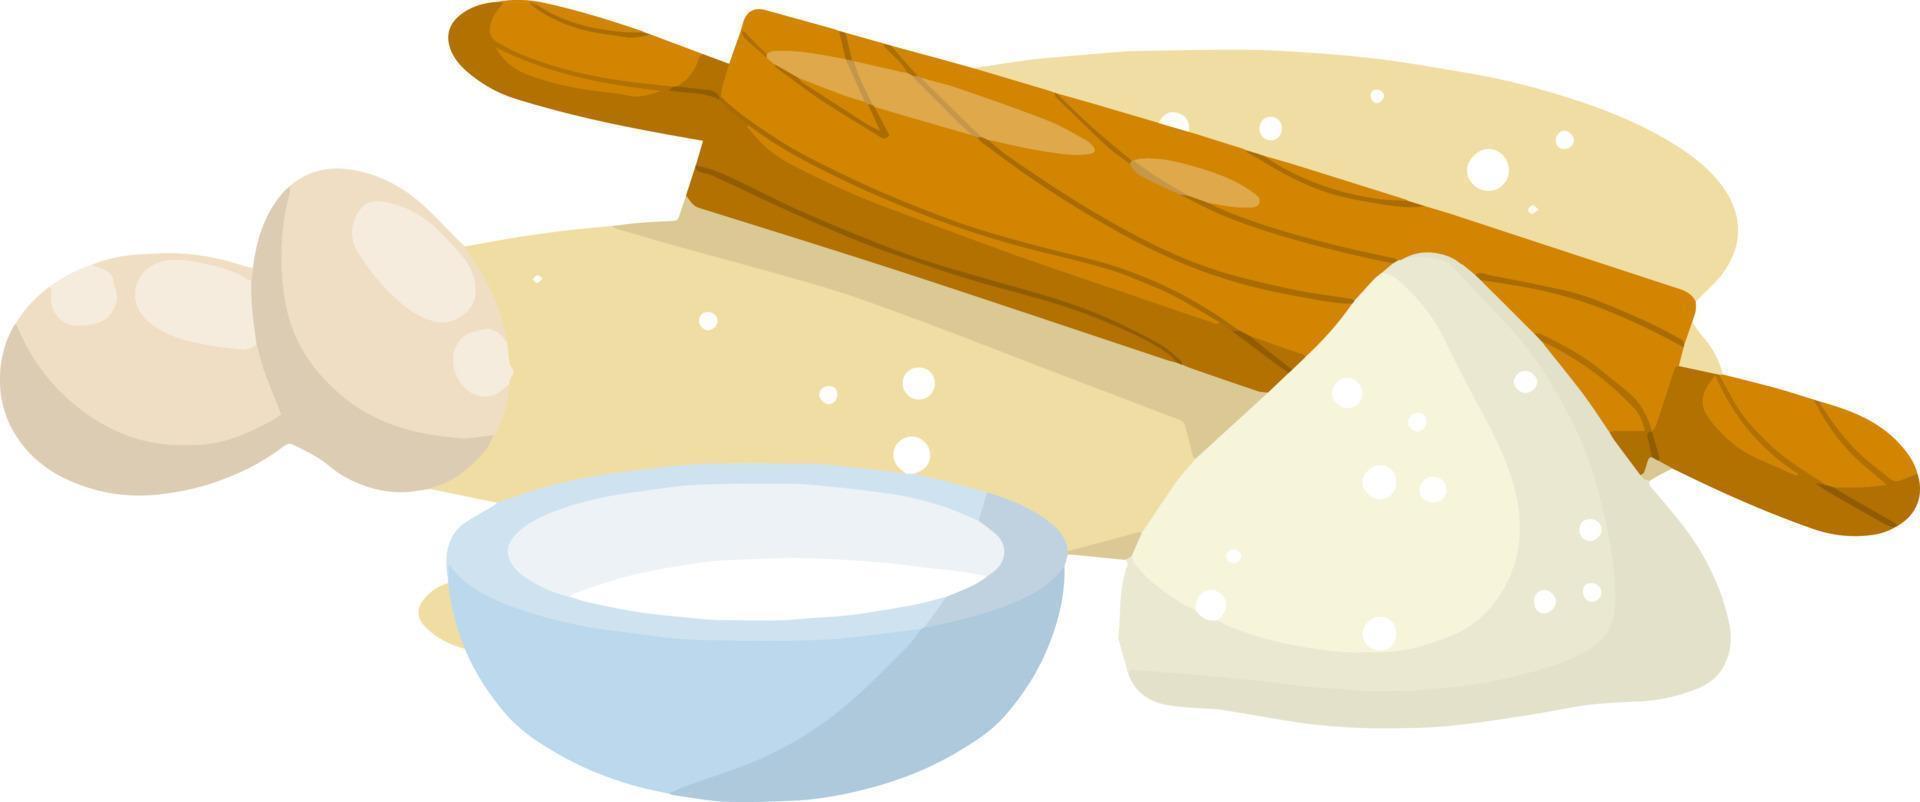 Rolling pin and dough. Wooden appliance for kitchen and cooking. Kneading dough. Cartoon flat illustration. Preparation of bread and pastries vector